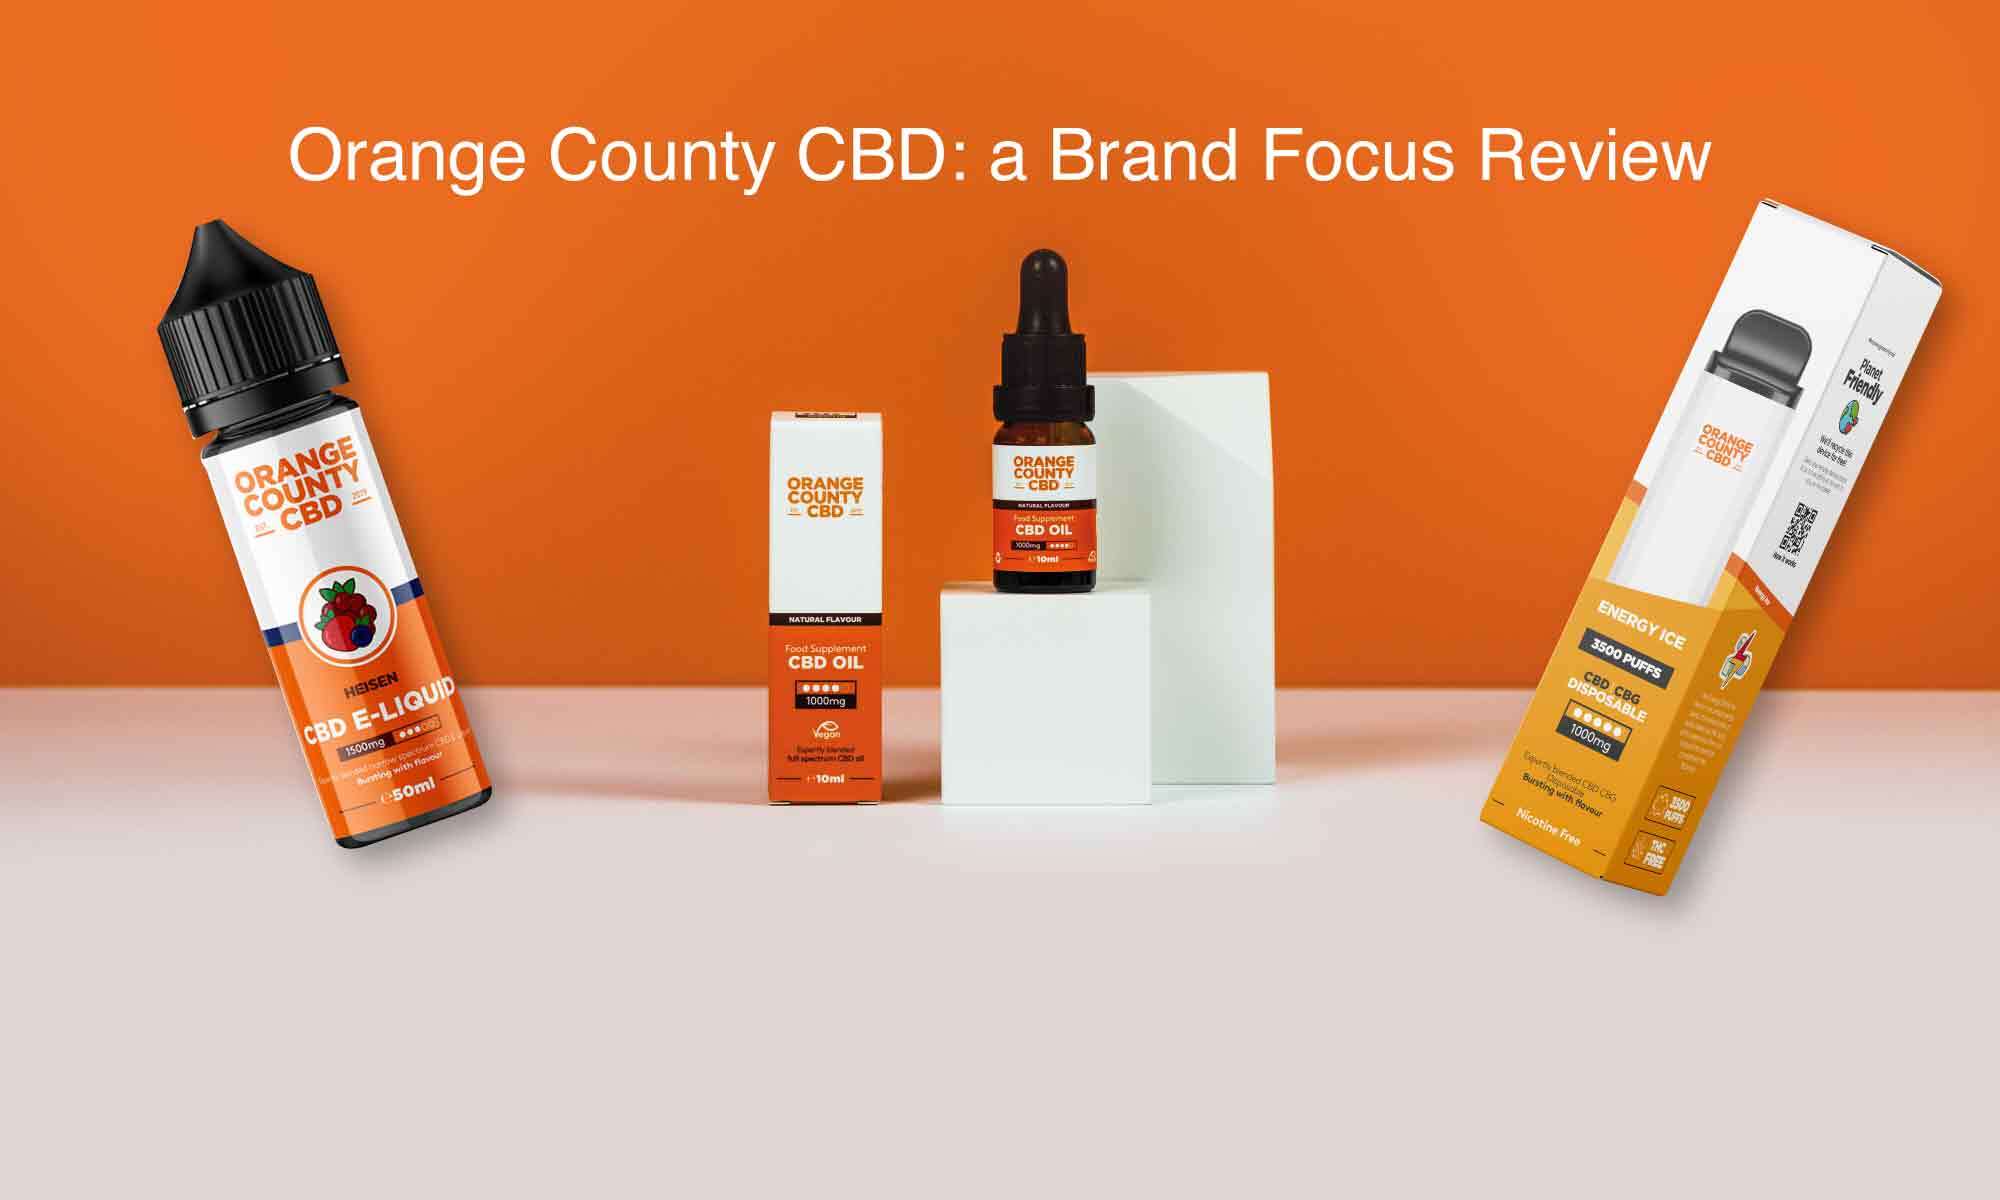 Collection of Orange County CBD Products Including CBD Oils and E-Liquids